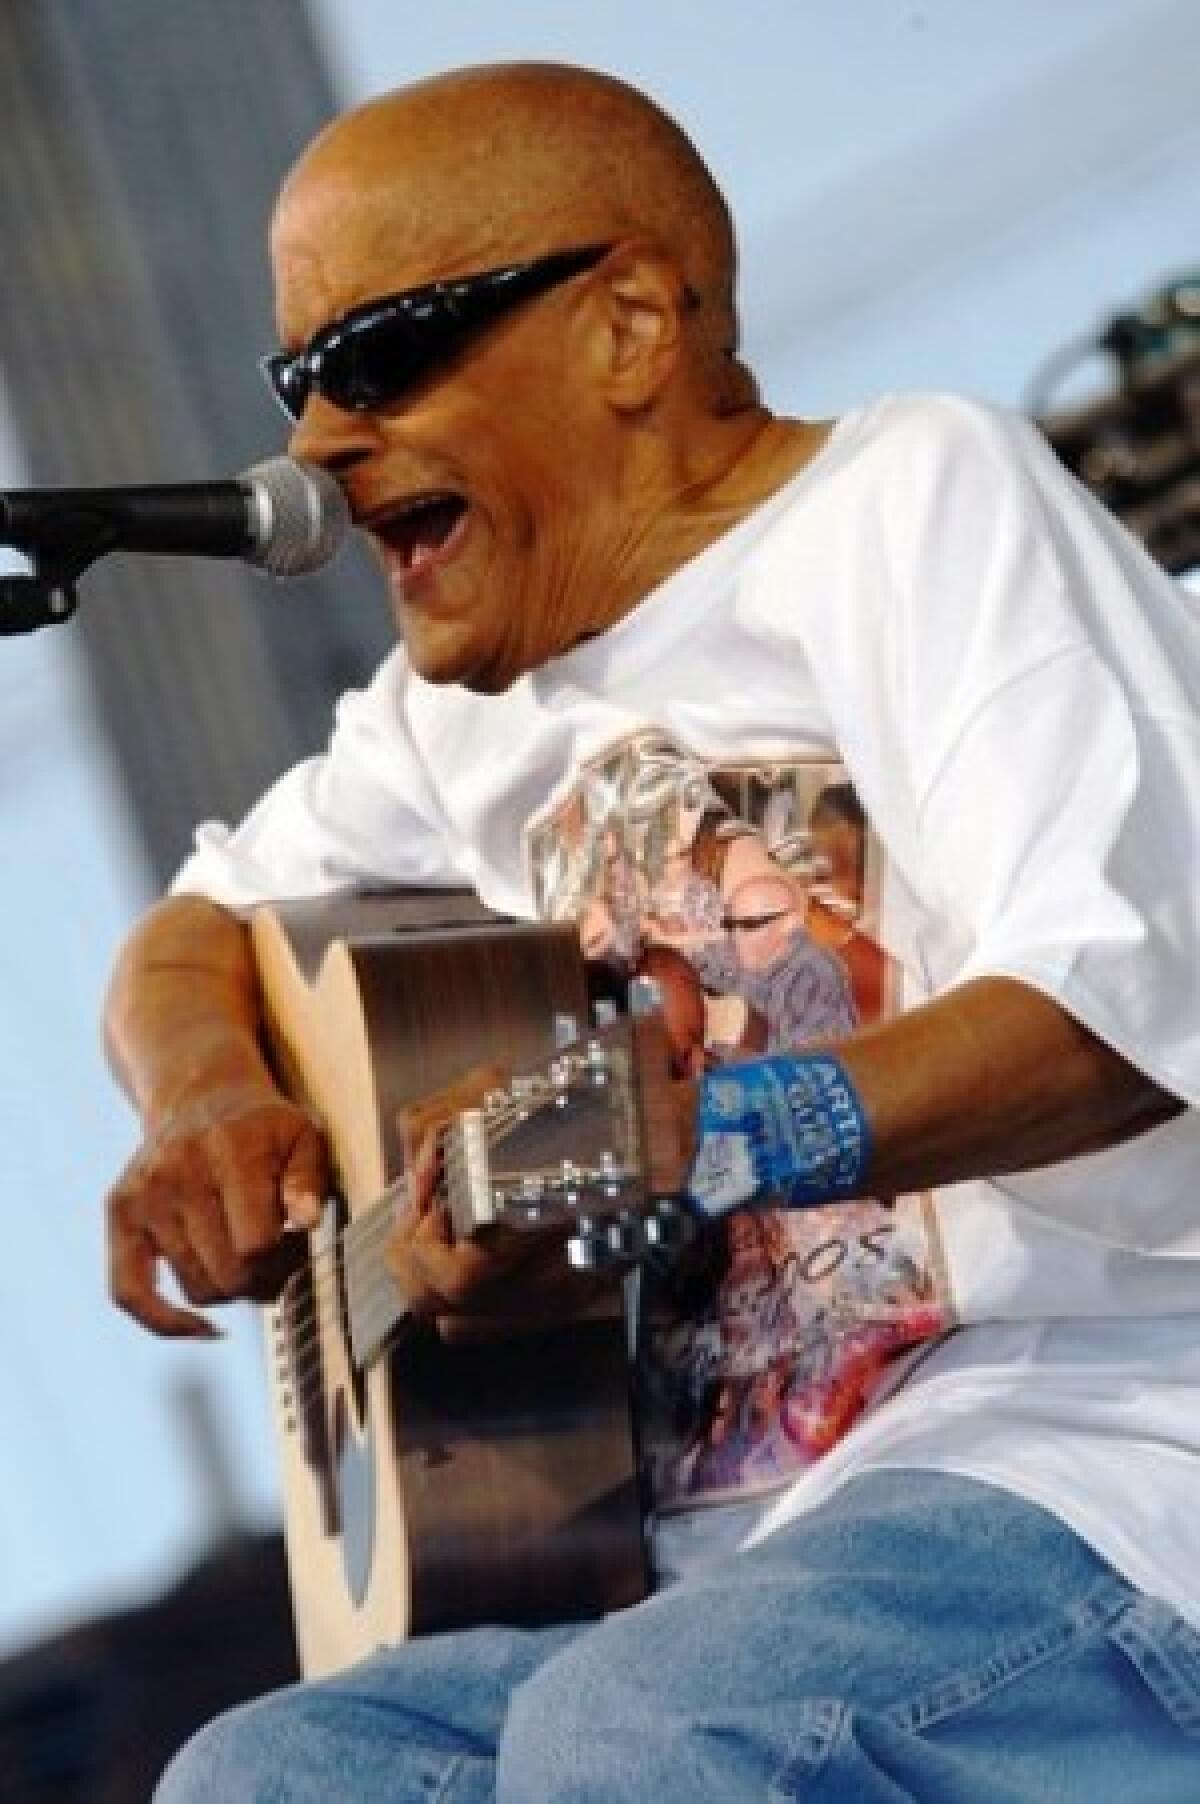 Musician Snooks Eaglin, here performing at last year's New Orleans Jazz and Heritage Festival, had an unusual playing style: He'd pick guitar strings with his thumbnail.